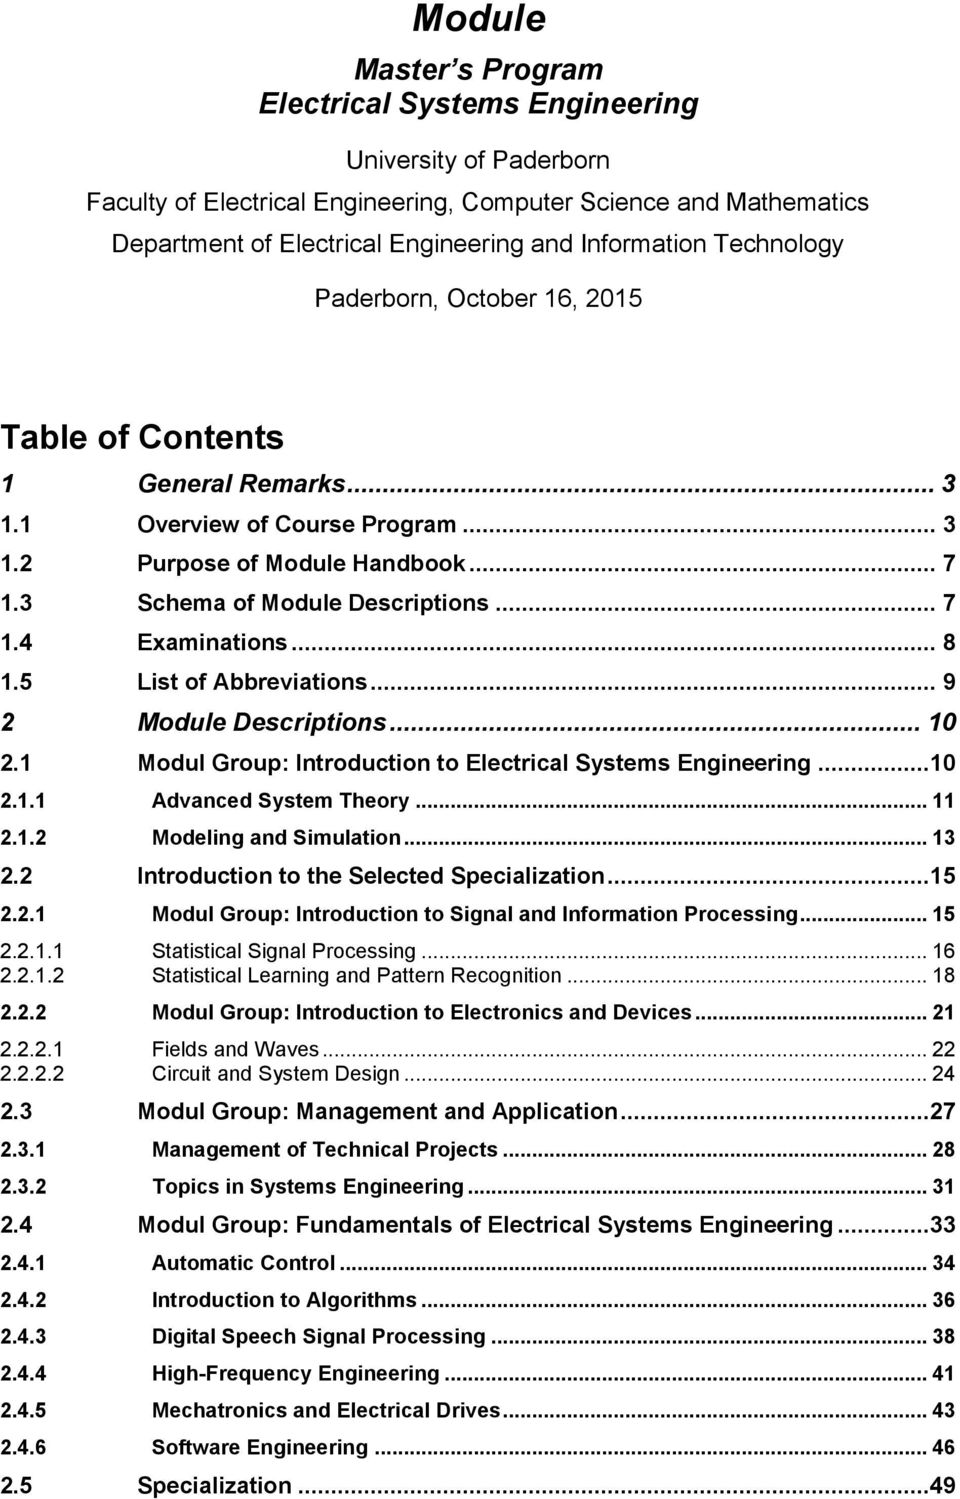 .. 8 1.5 List of Abbreviations... 9 2 Module Descriptions... 10 2.1 Modul Group: Introduction to Electrical Systems Engineering...10 2.1.1 Advanced System Theory... 11 2.1.2 Modeling and Simulation.